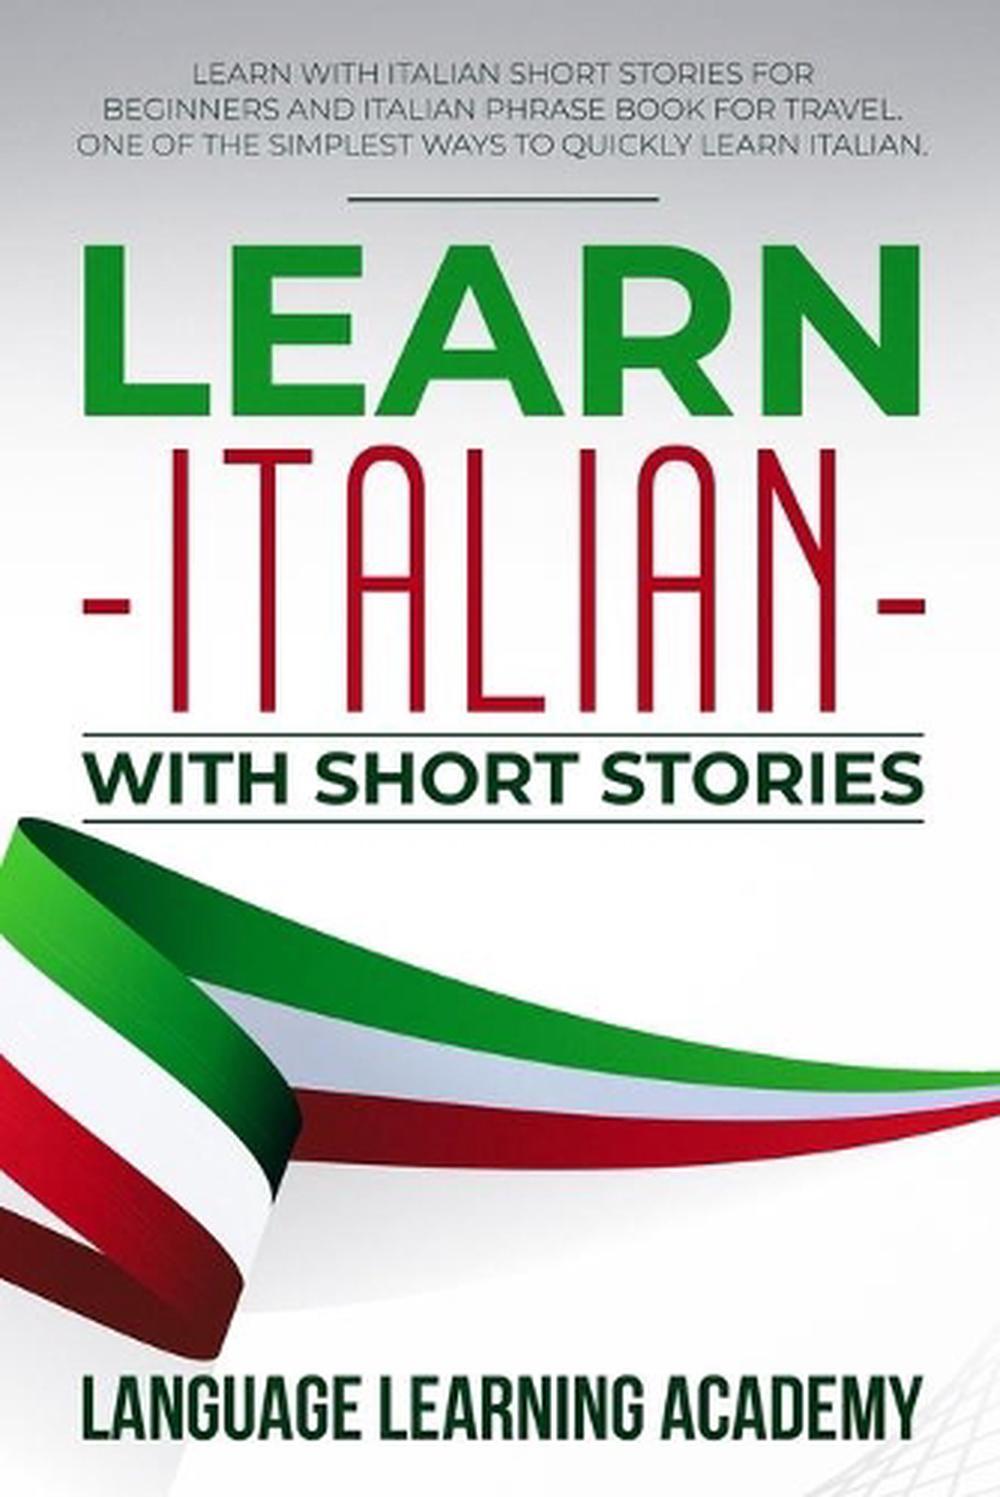 Learn Italian With Short Stories by Tbd (English) Paperback Book Free ...